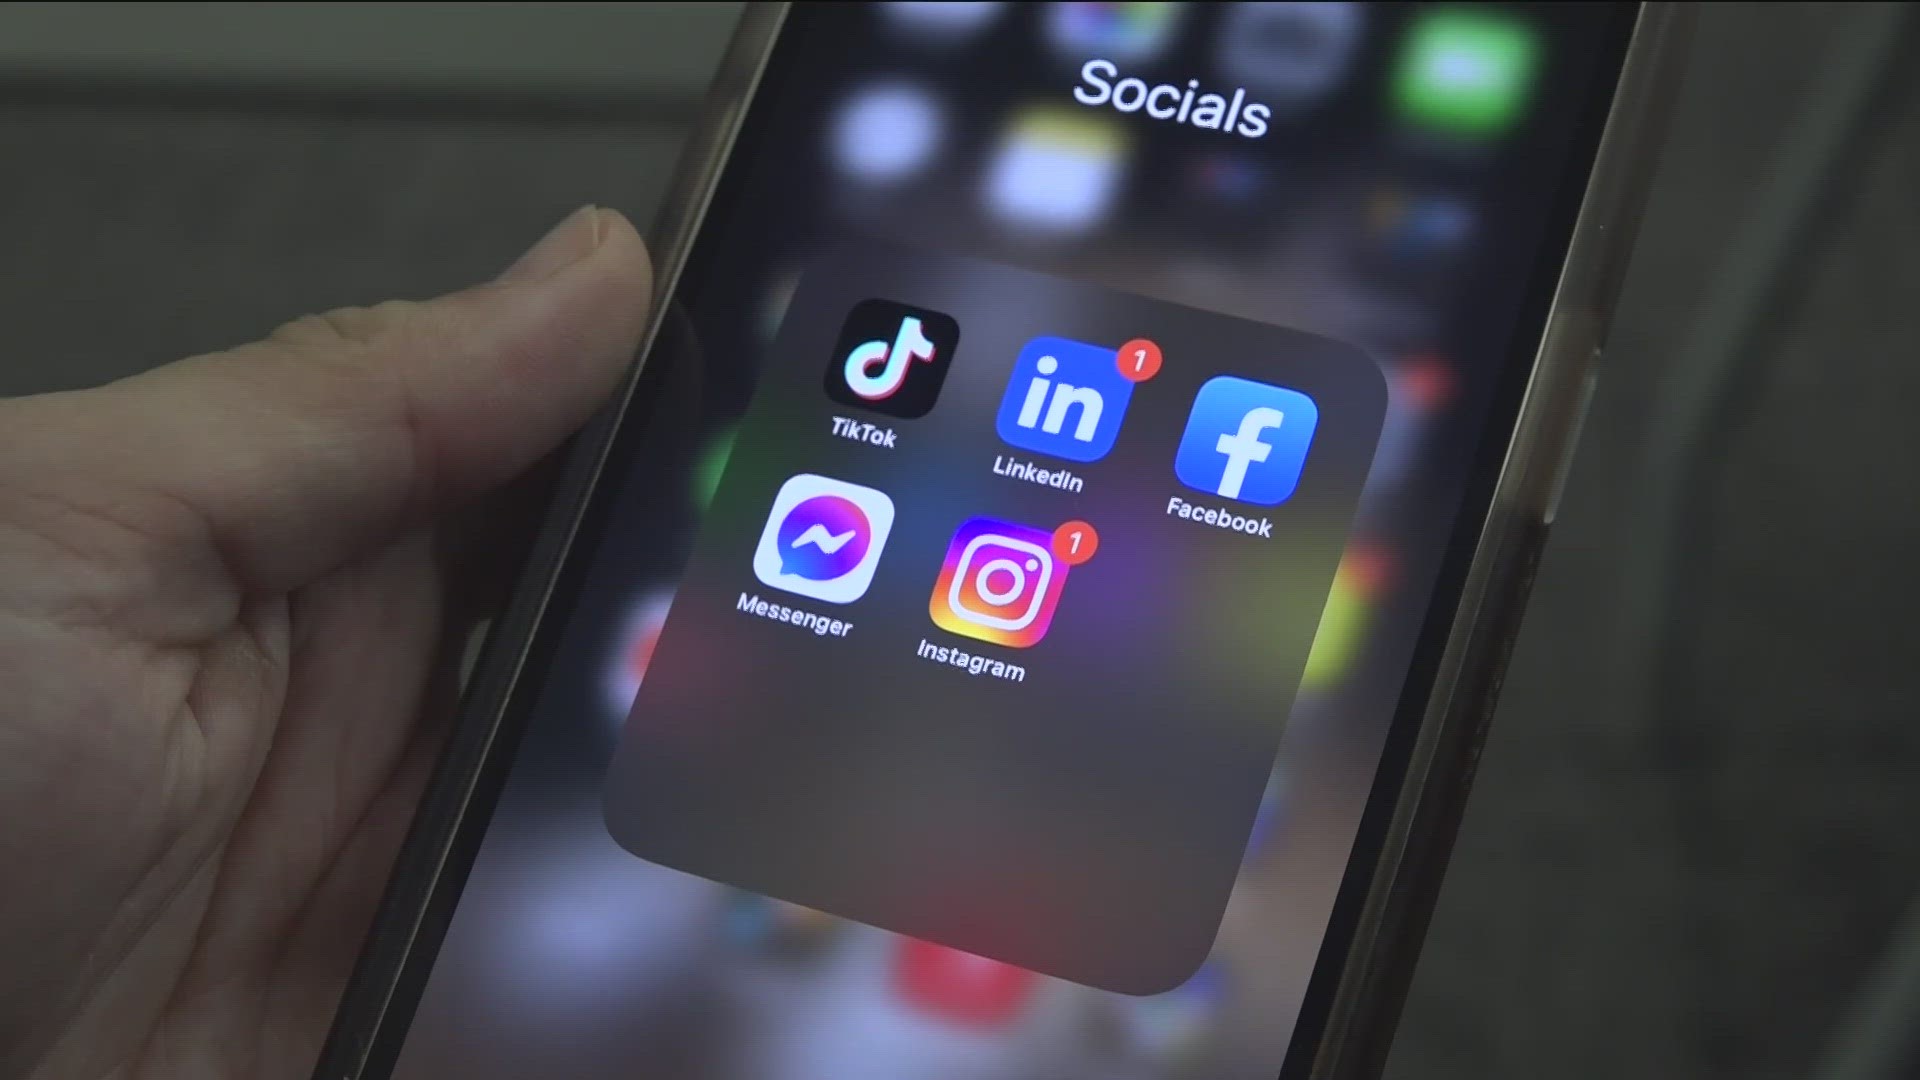 Ohio Gov. Mike DeWine and Lt. Gov. John Husted are calling on state legislators to pass the Parental Notification Act, which would require consent for social media.